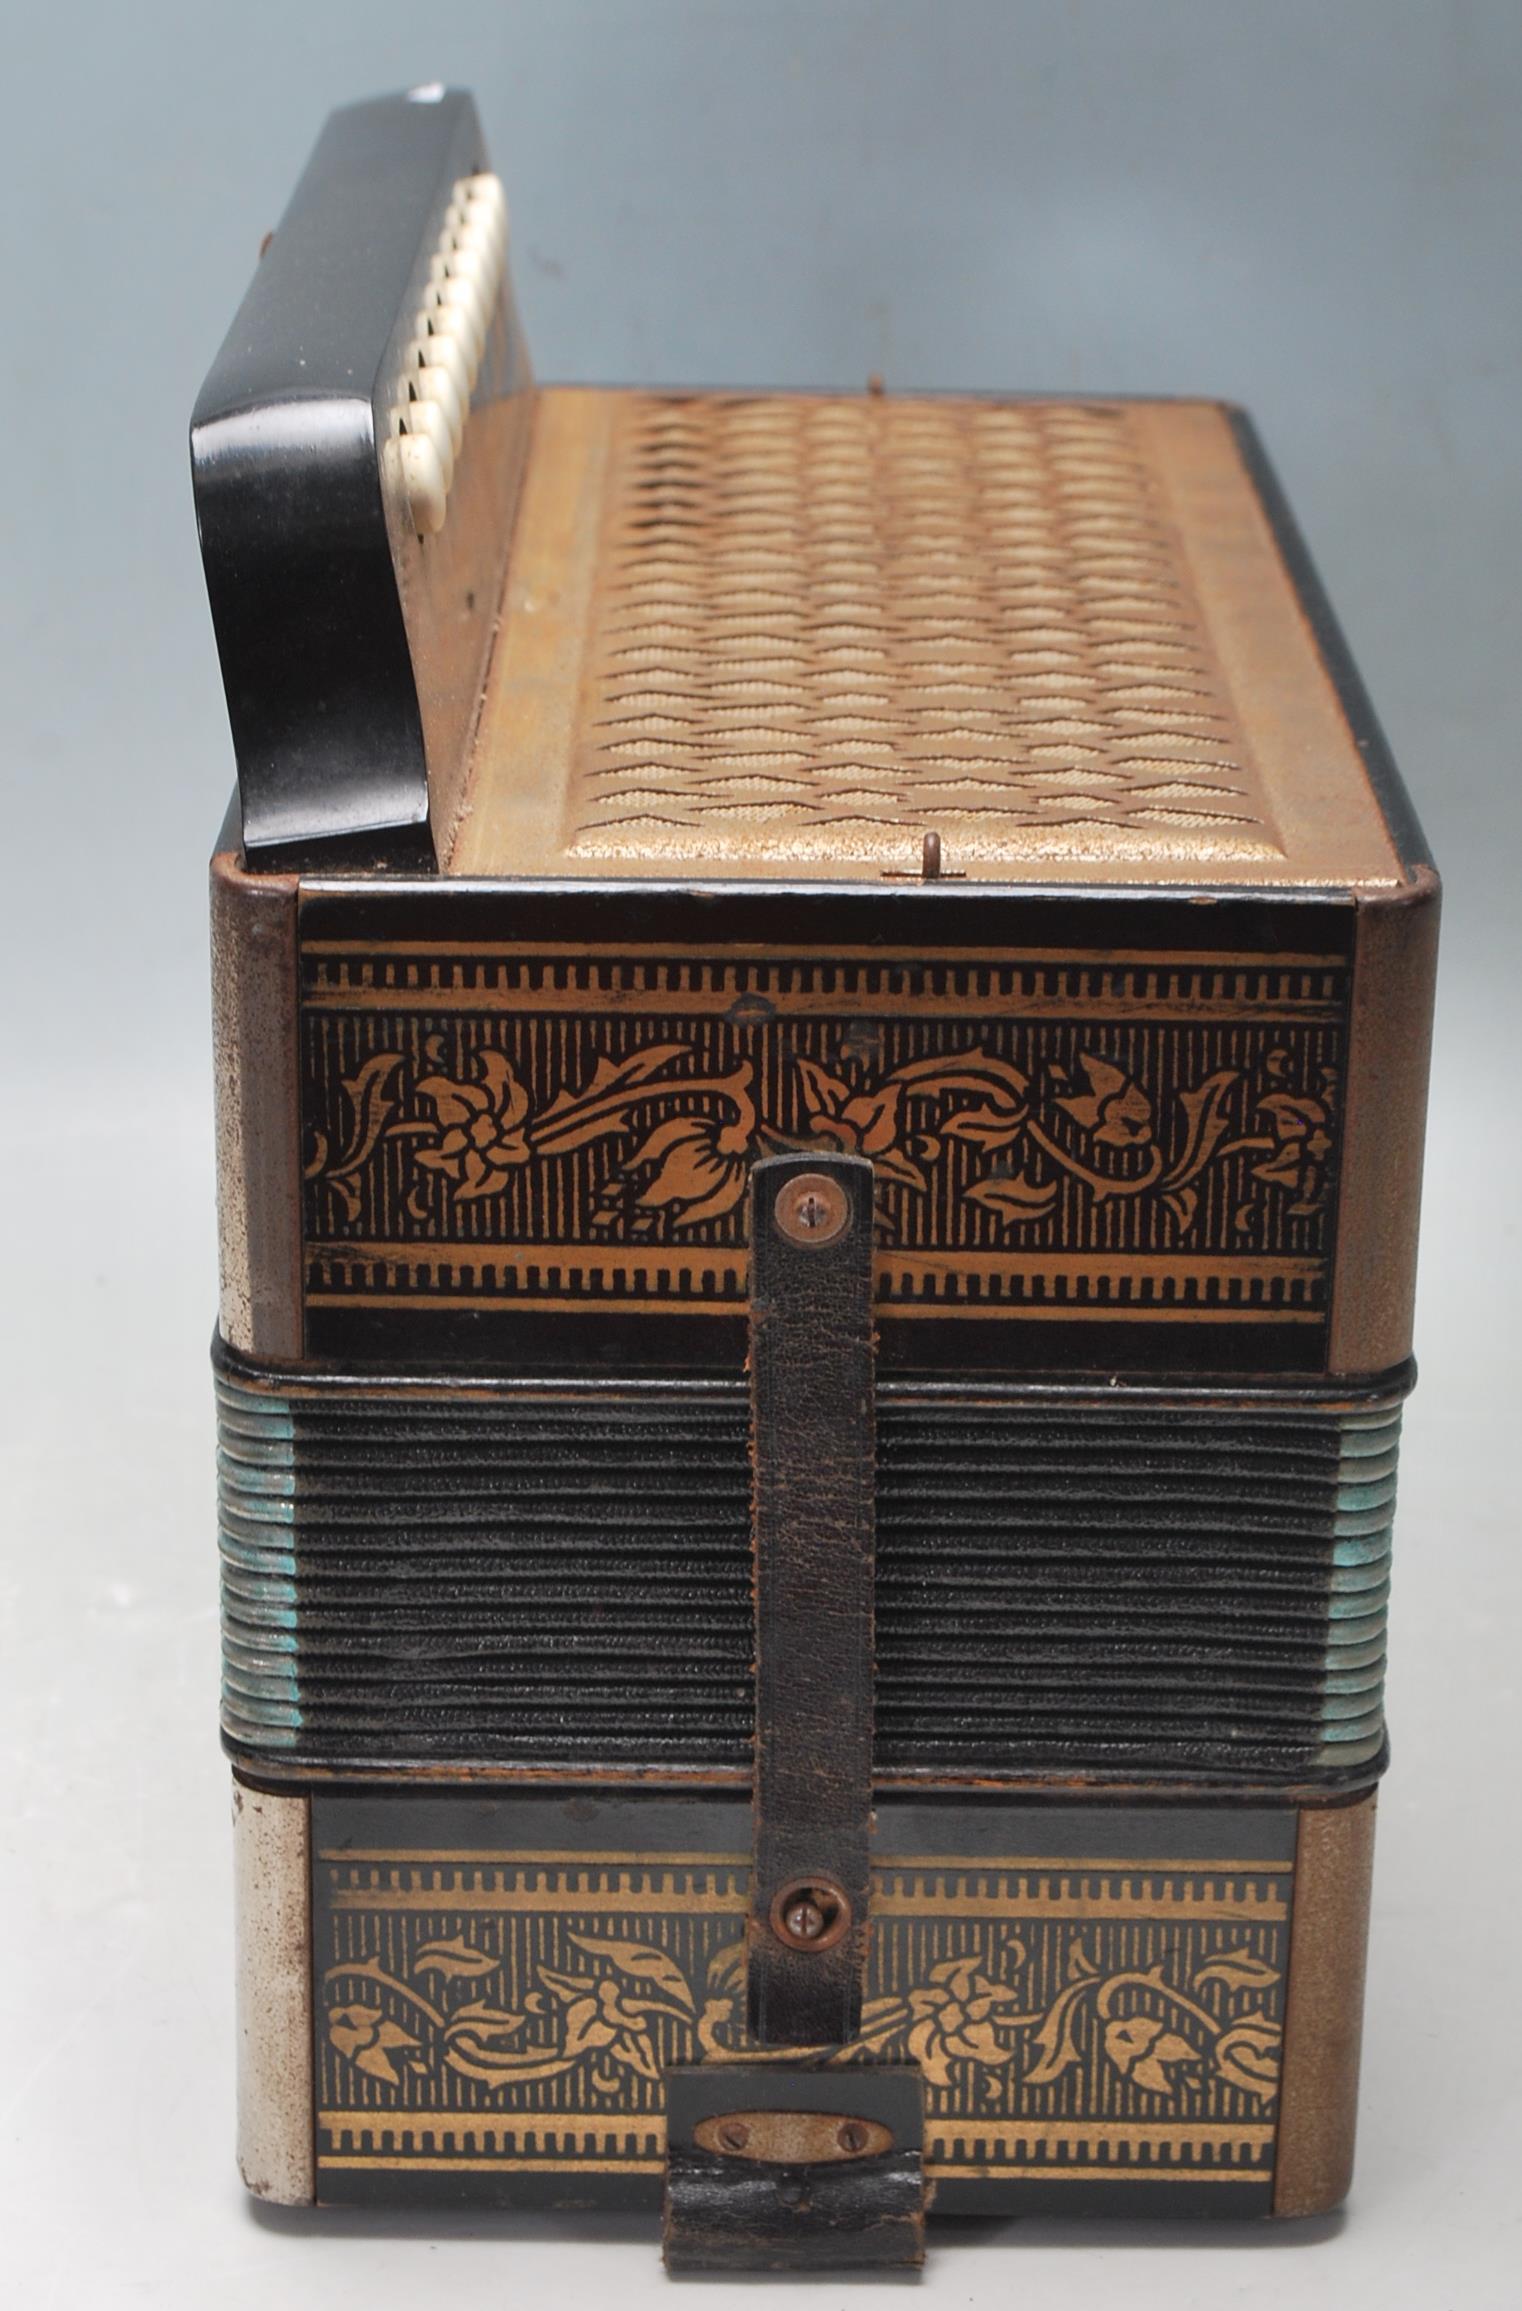 EARLY 20TH CENTURY 1930S VINTAGE ACCORDIAN BY HOHNER - Image 5 of 7